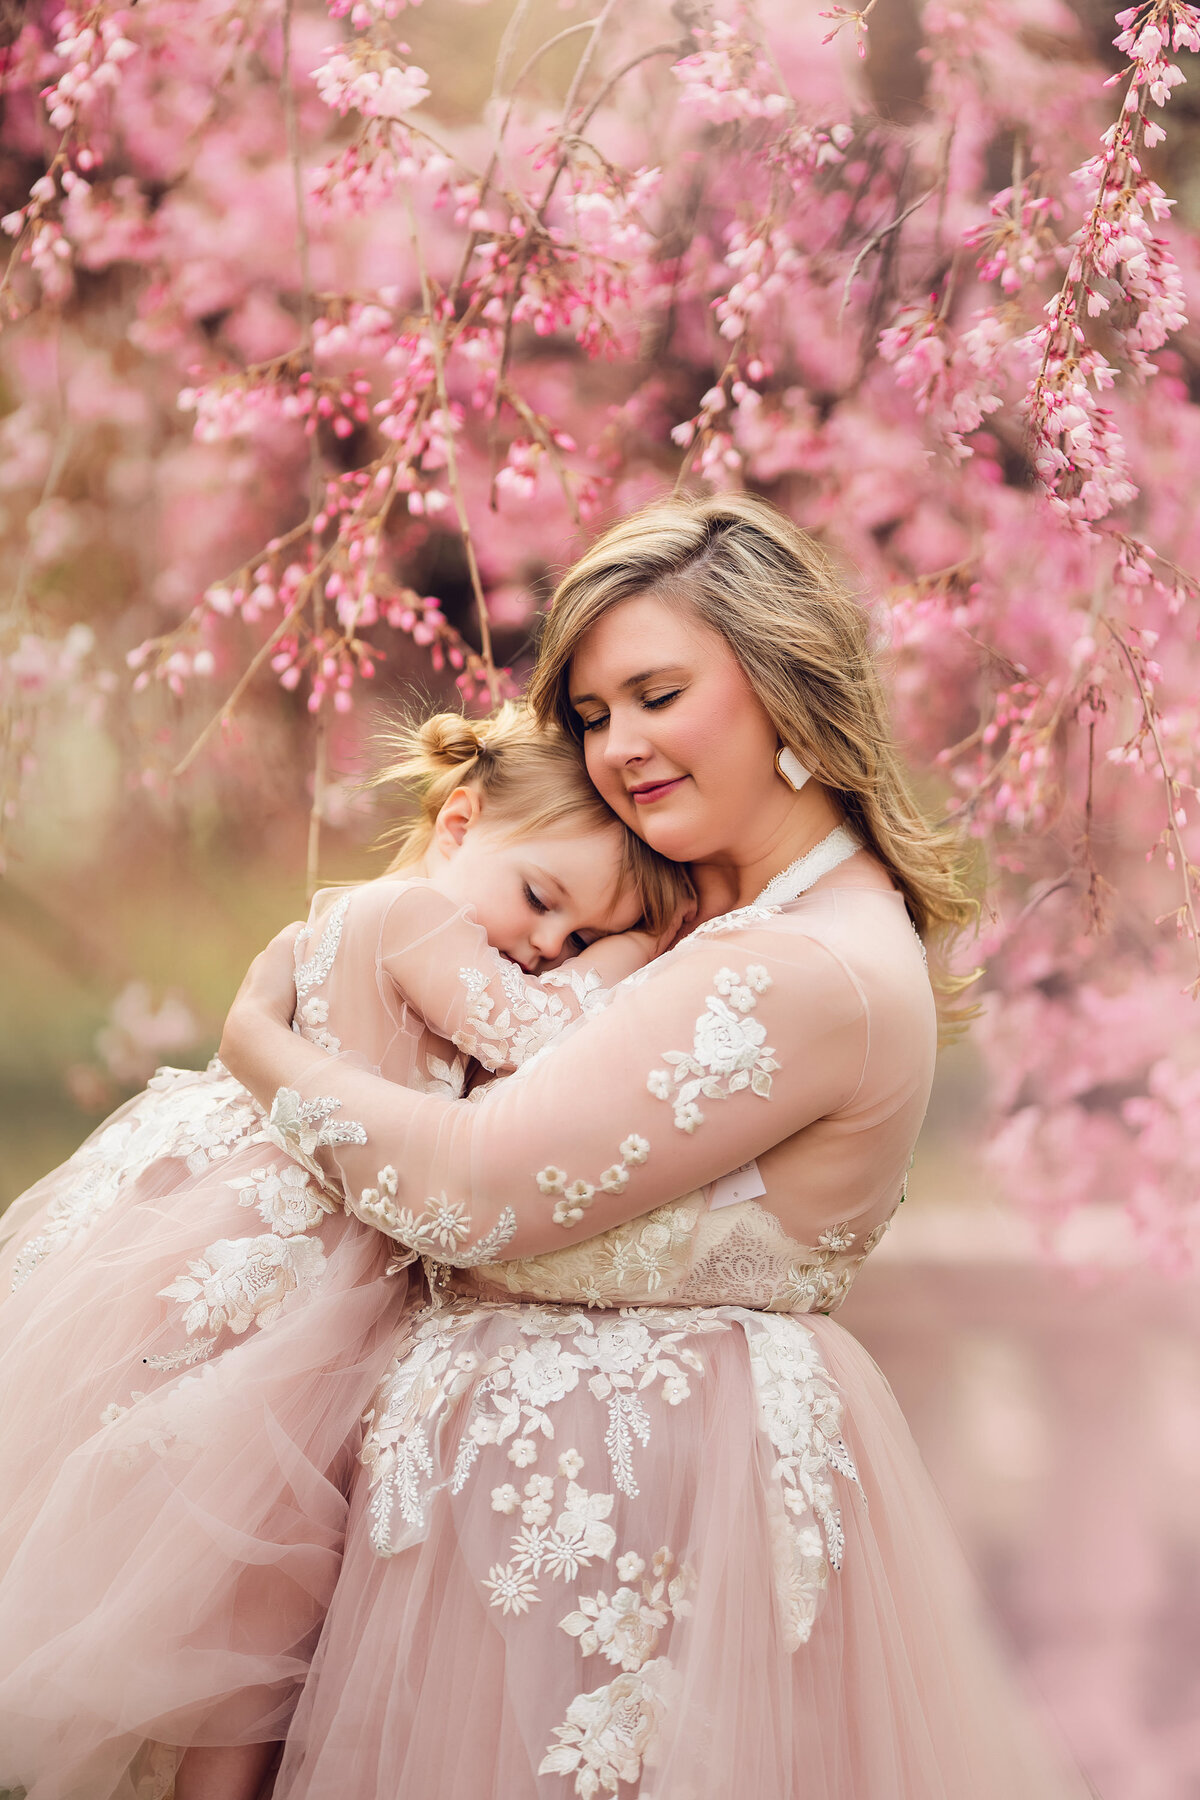 A mother and her young daughter wearing matching, blush gowns embrace surrounded by trees covered in pink blossoms.